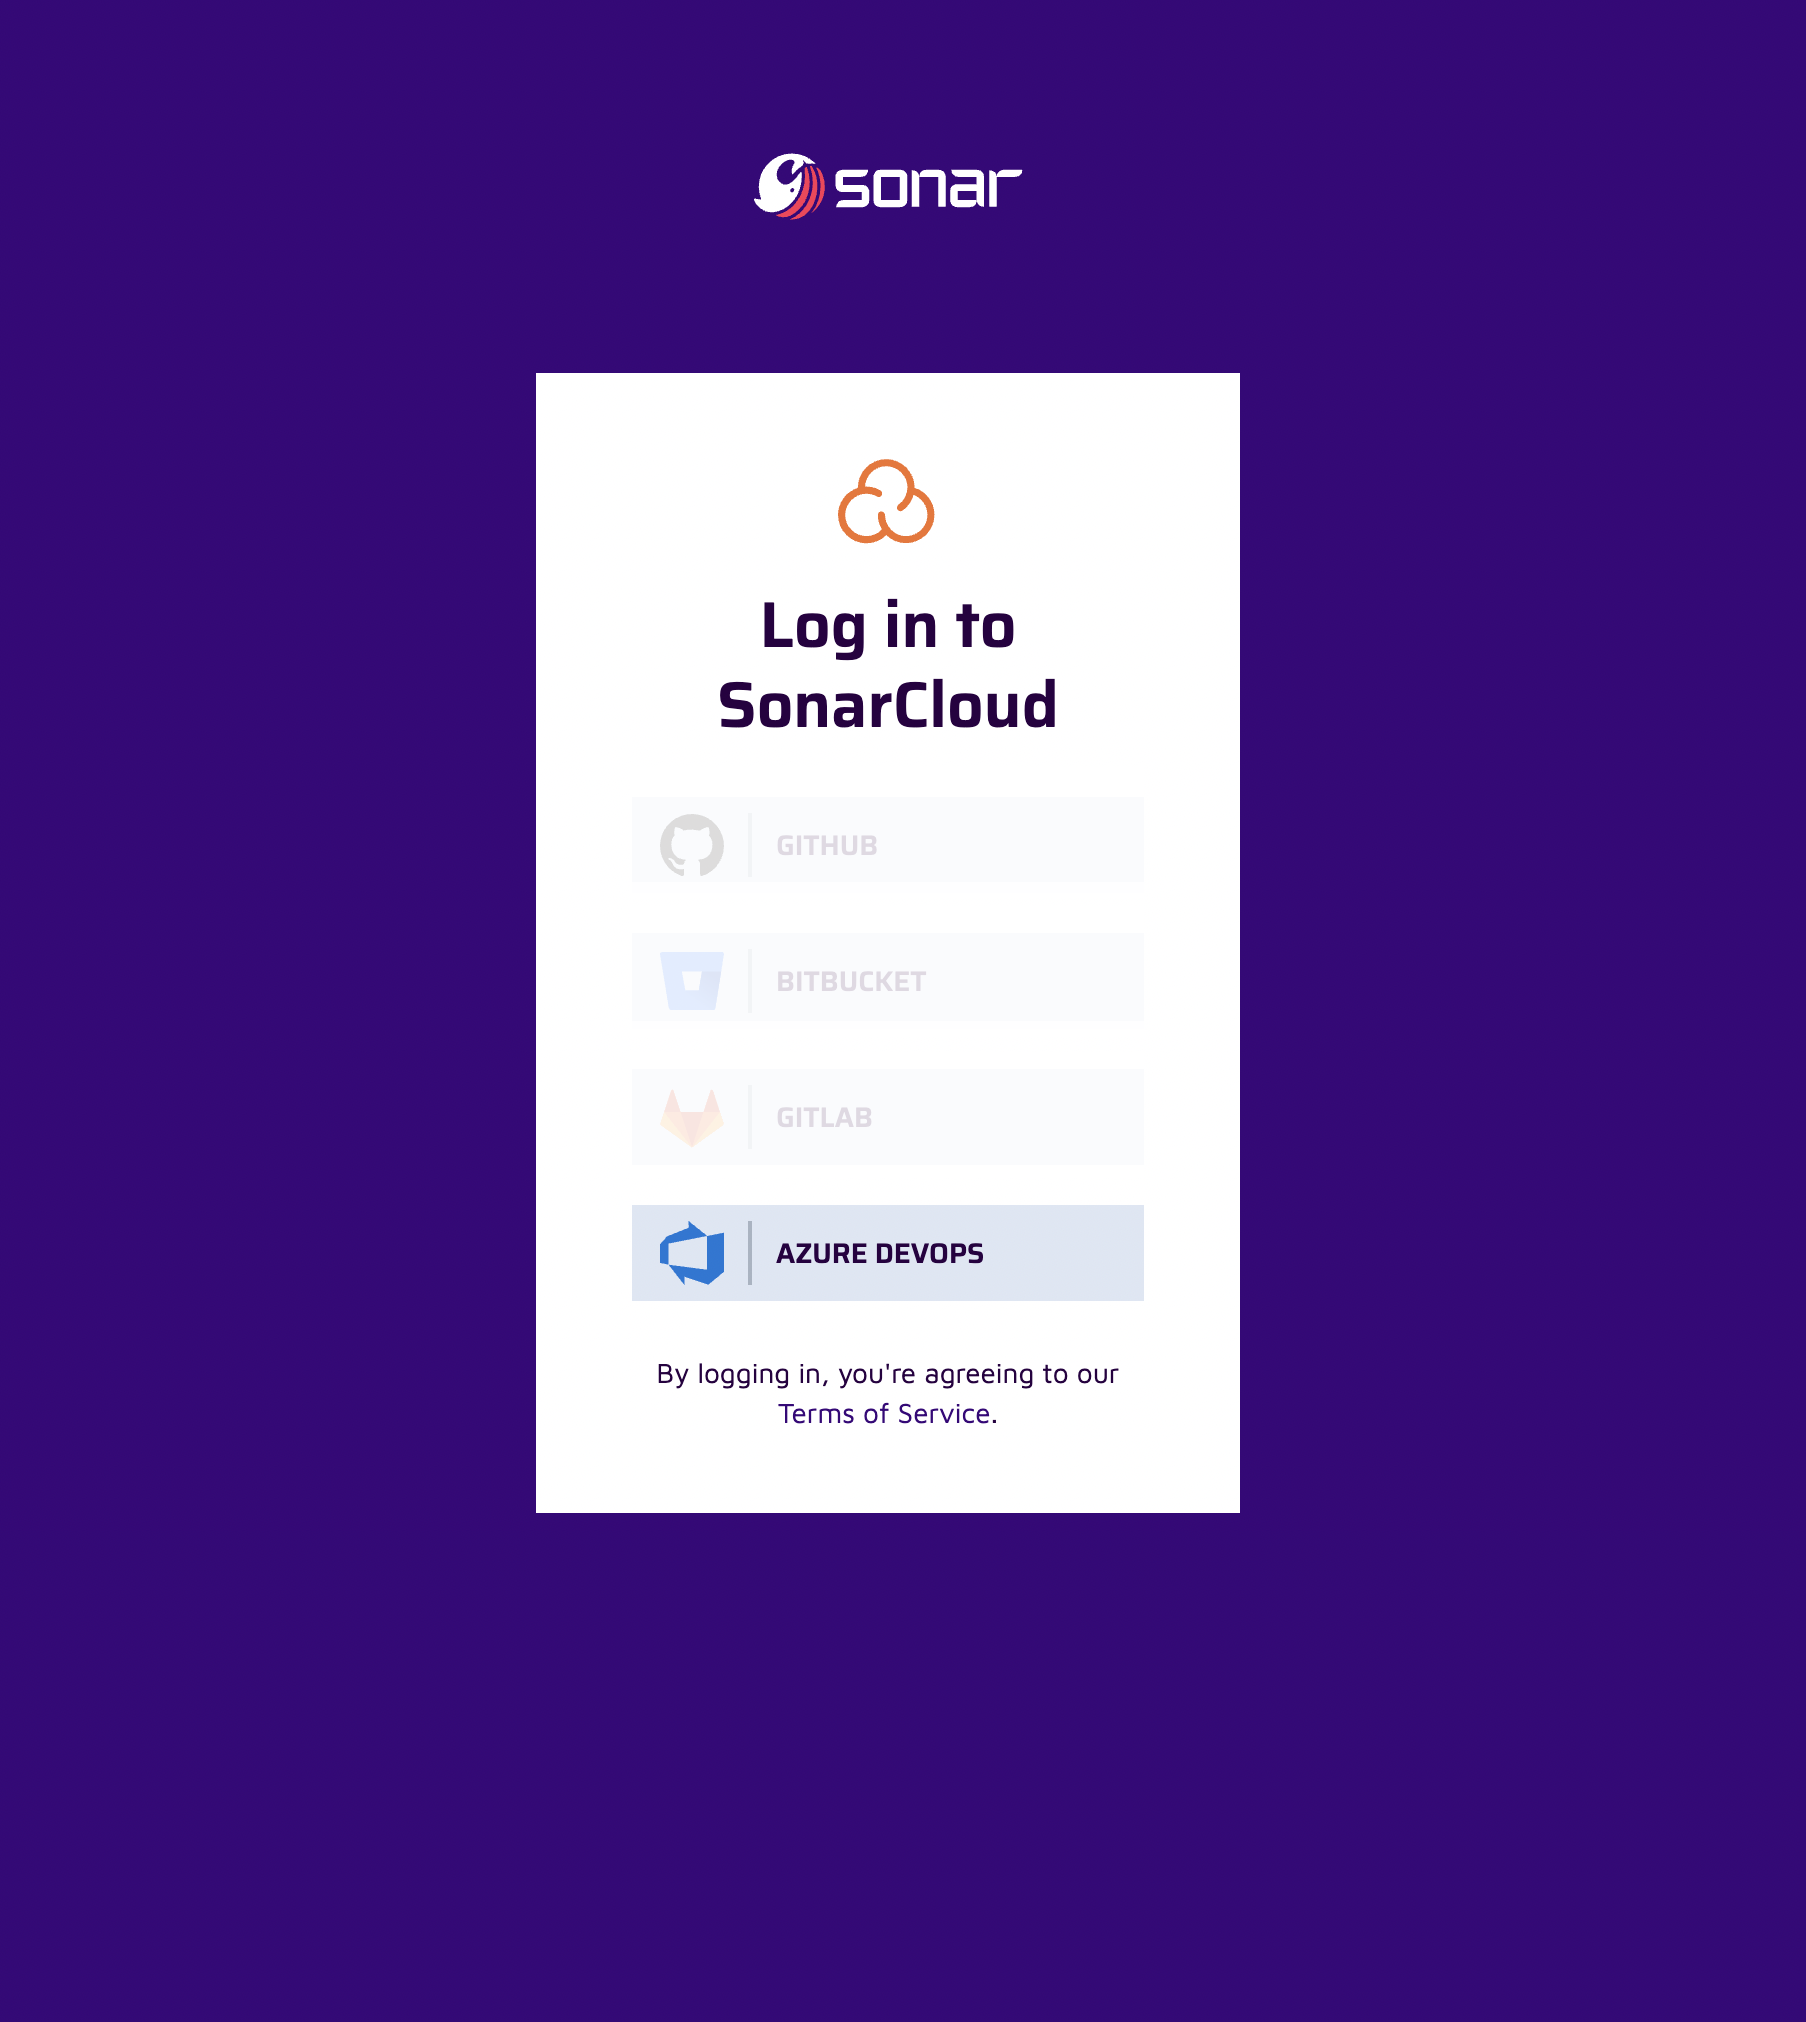 Select Azure DevOps to sign in to SonarCloud.